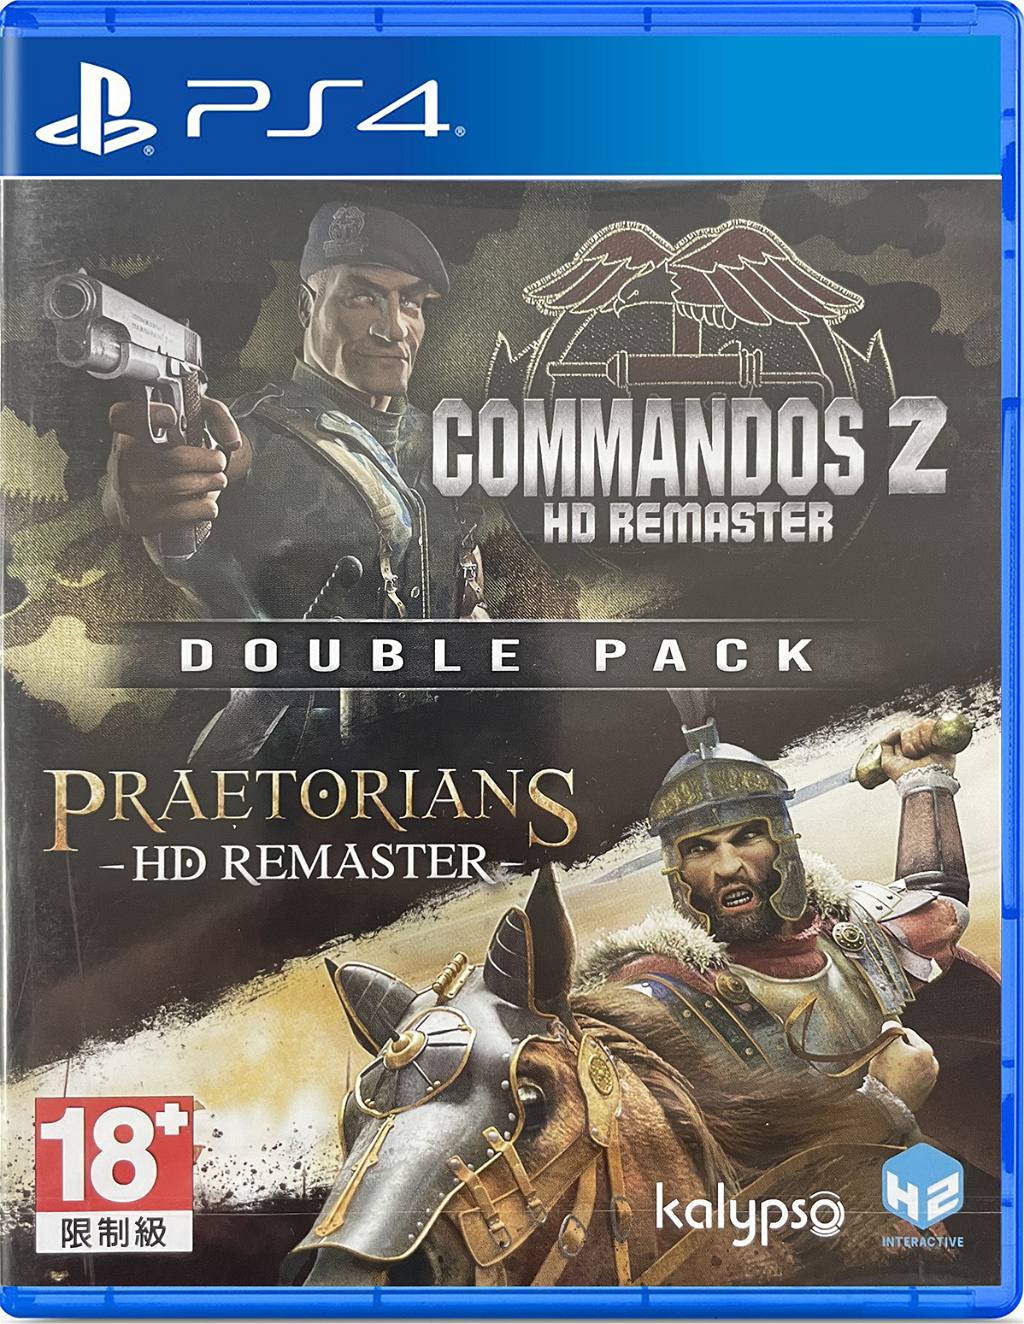 2 / Praetorians HD Remaster Double Pack for PlayStation